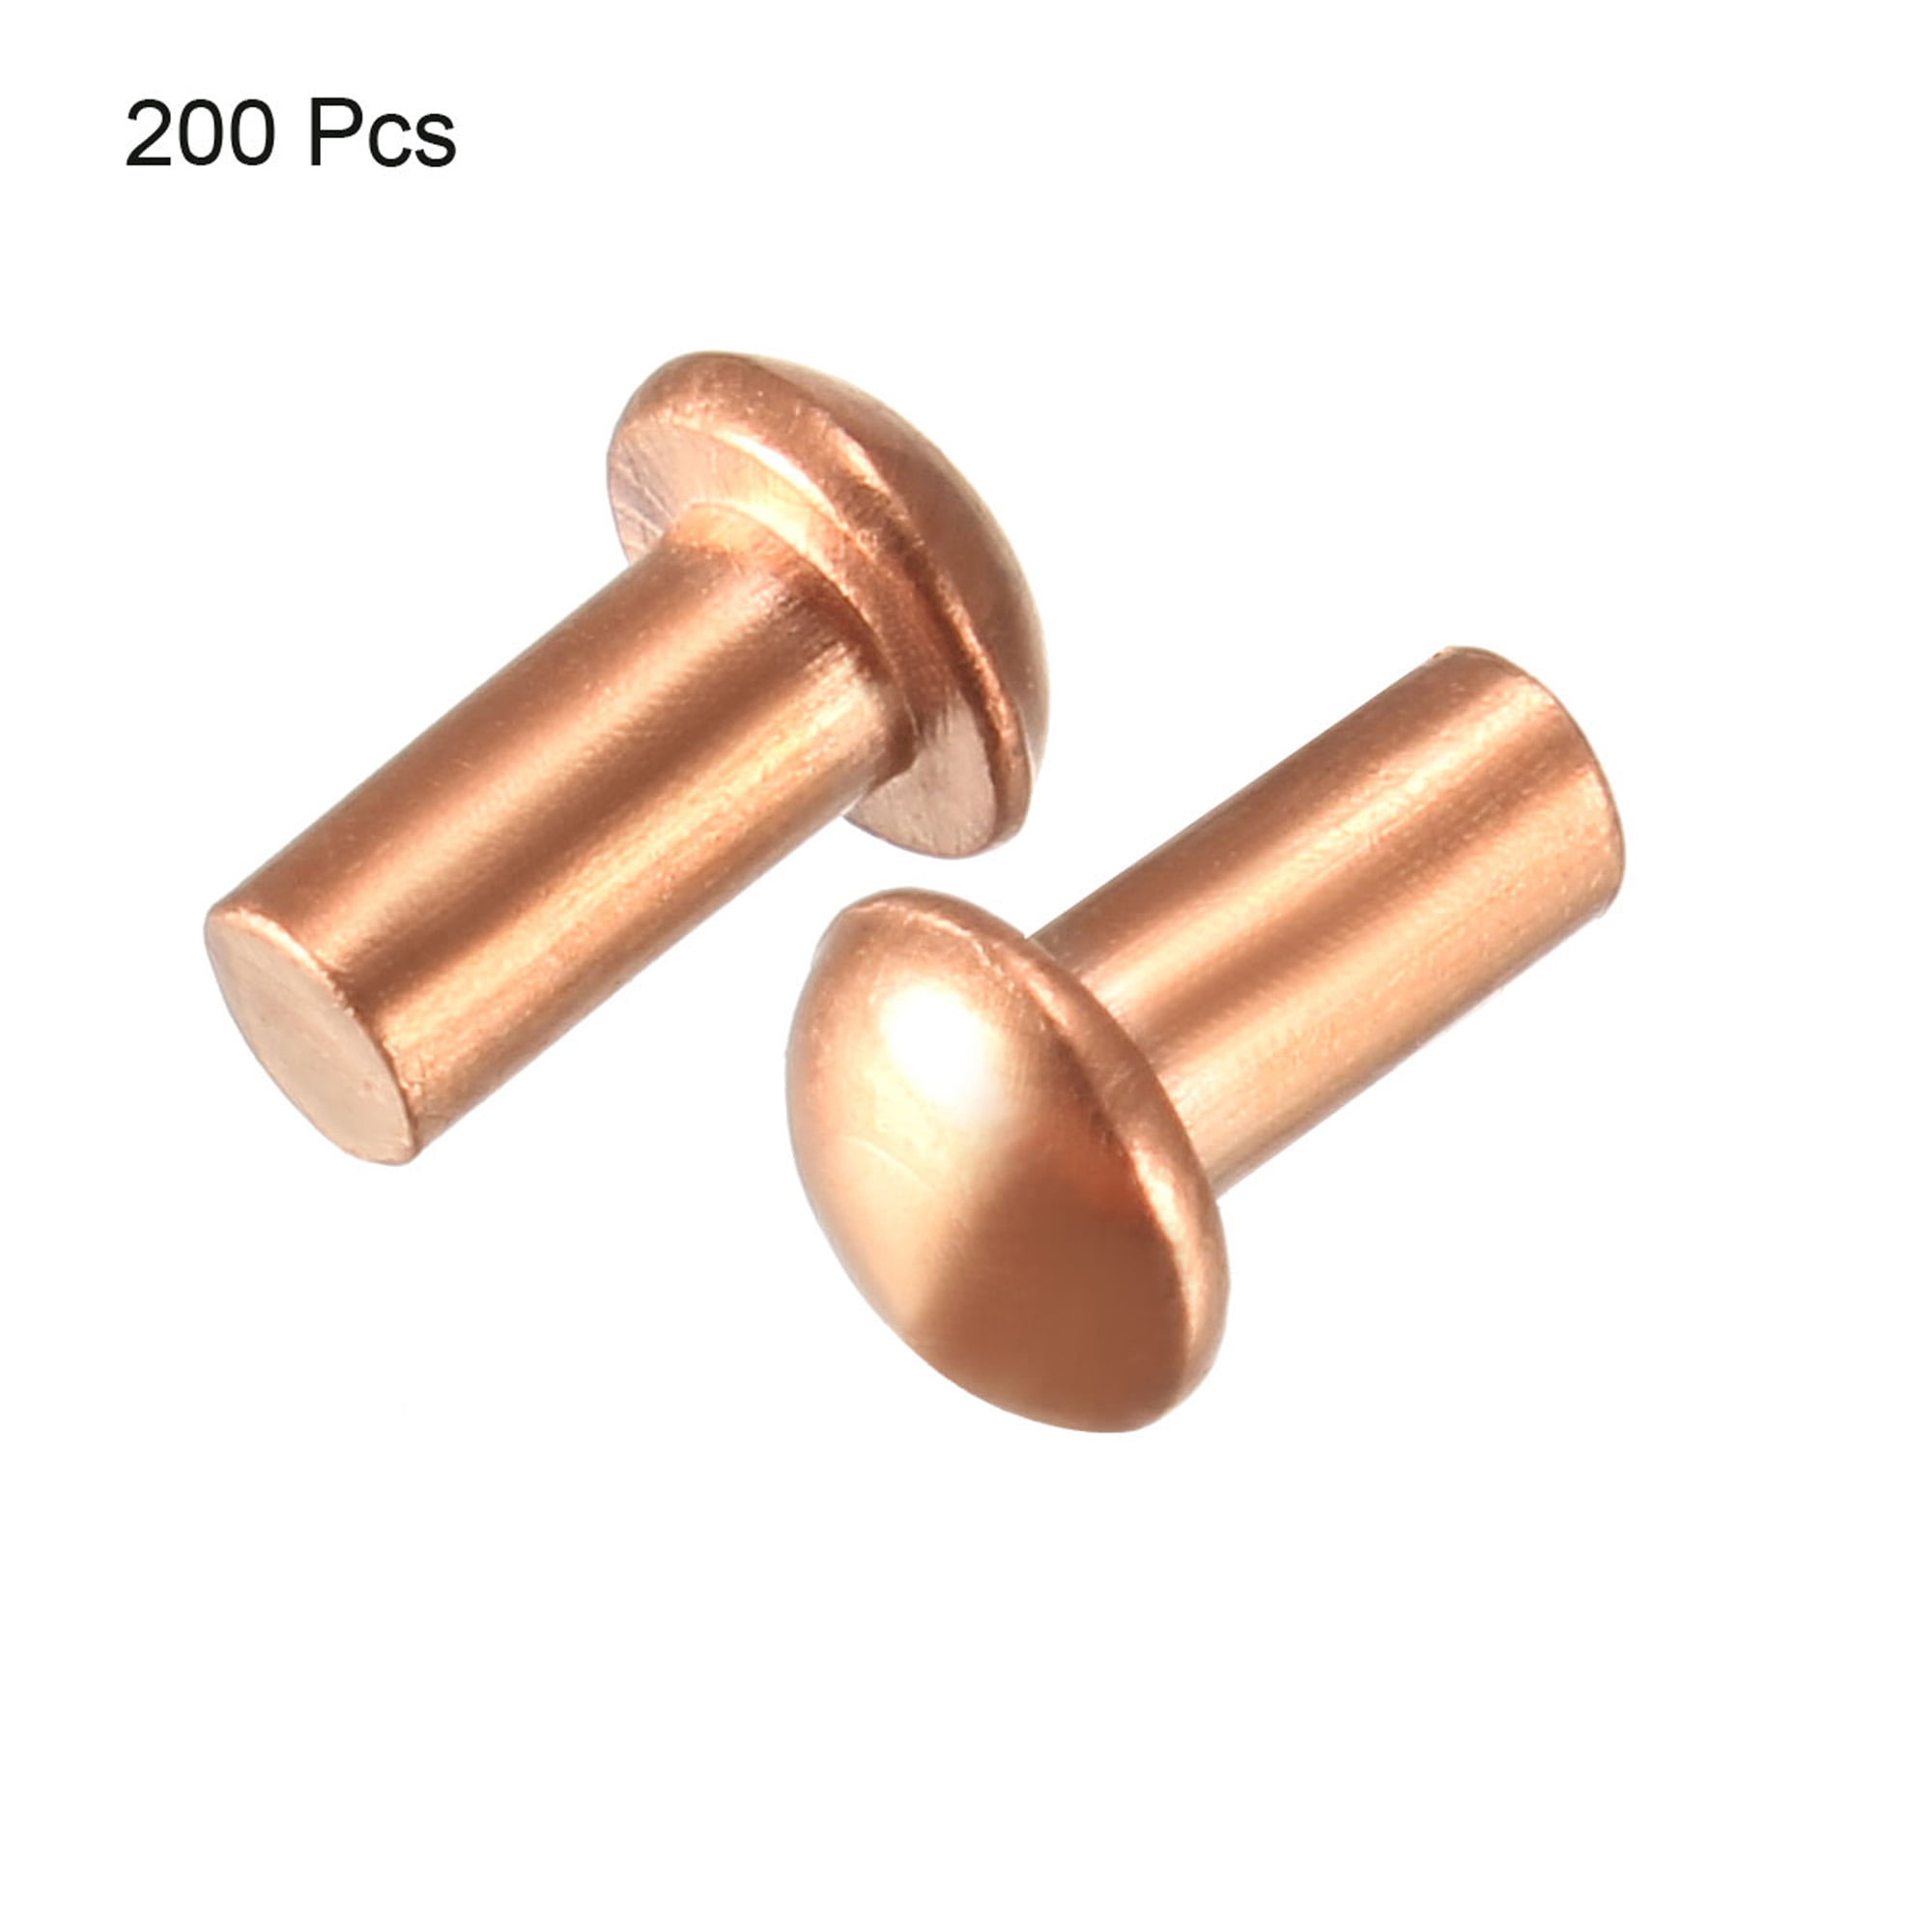 200Pcs 3/32" x 1/4" Round Head Copper Solid Rivets Fasteners for electrical ♫ 